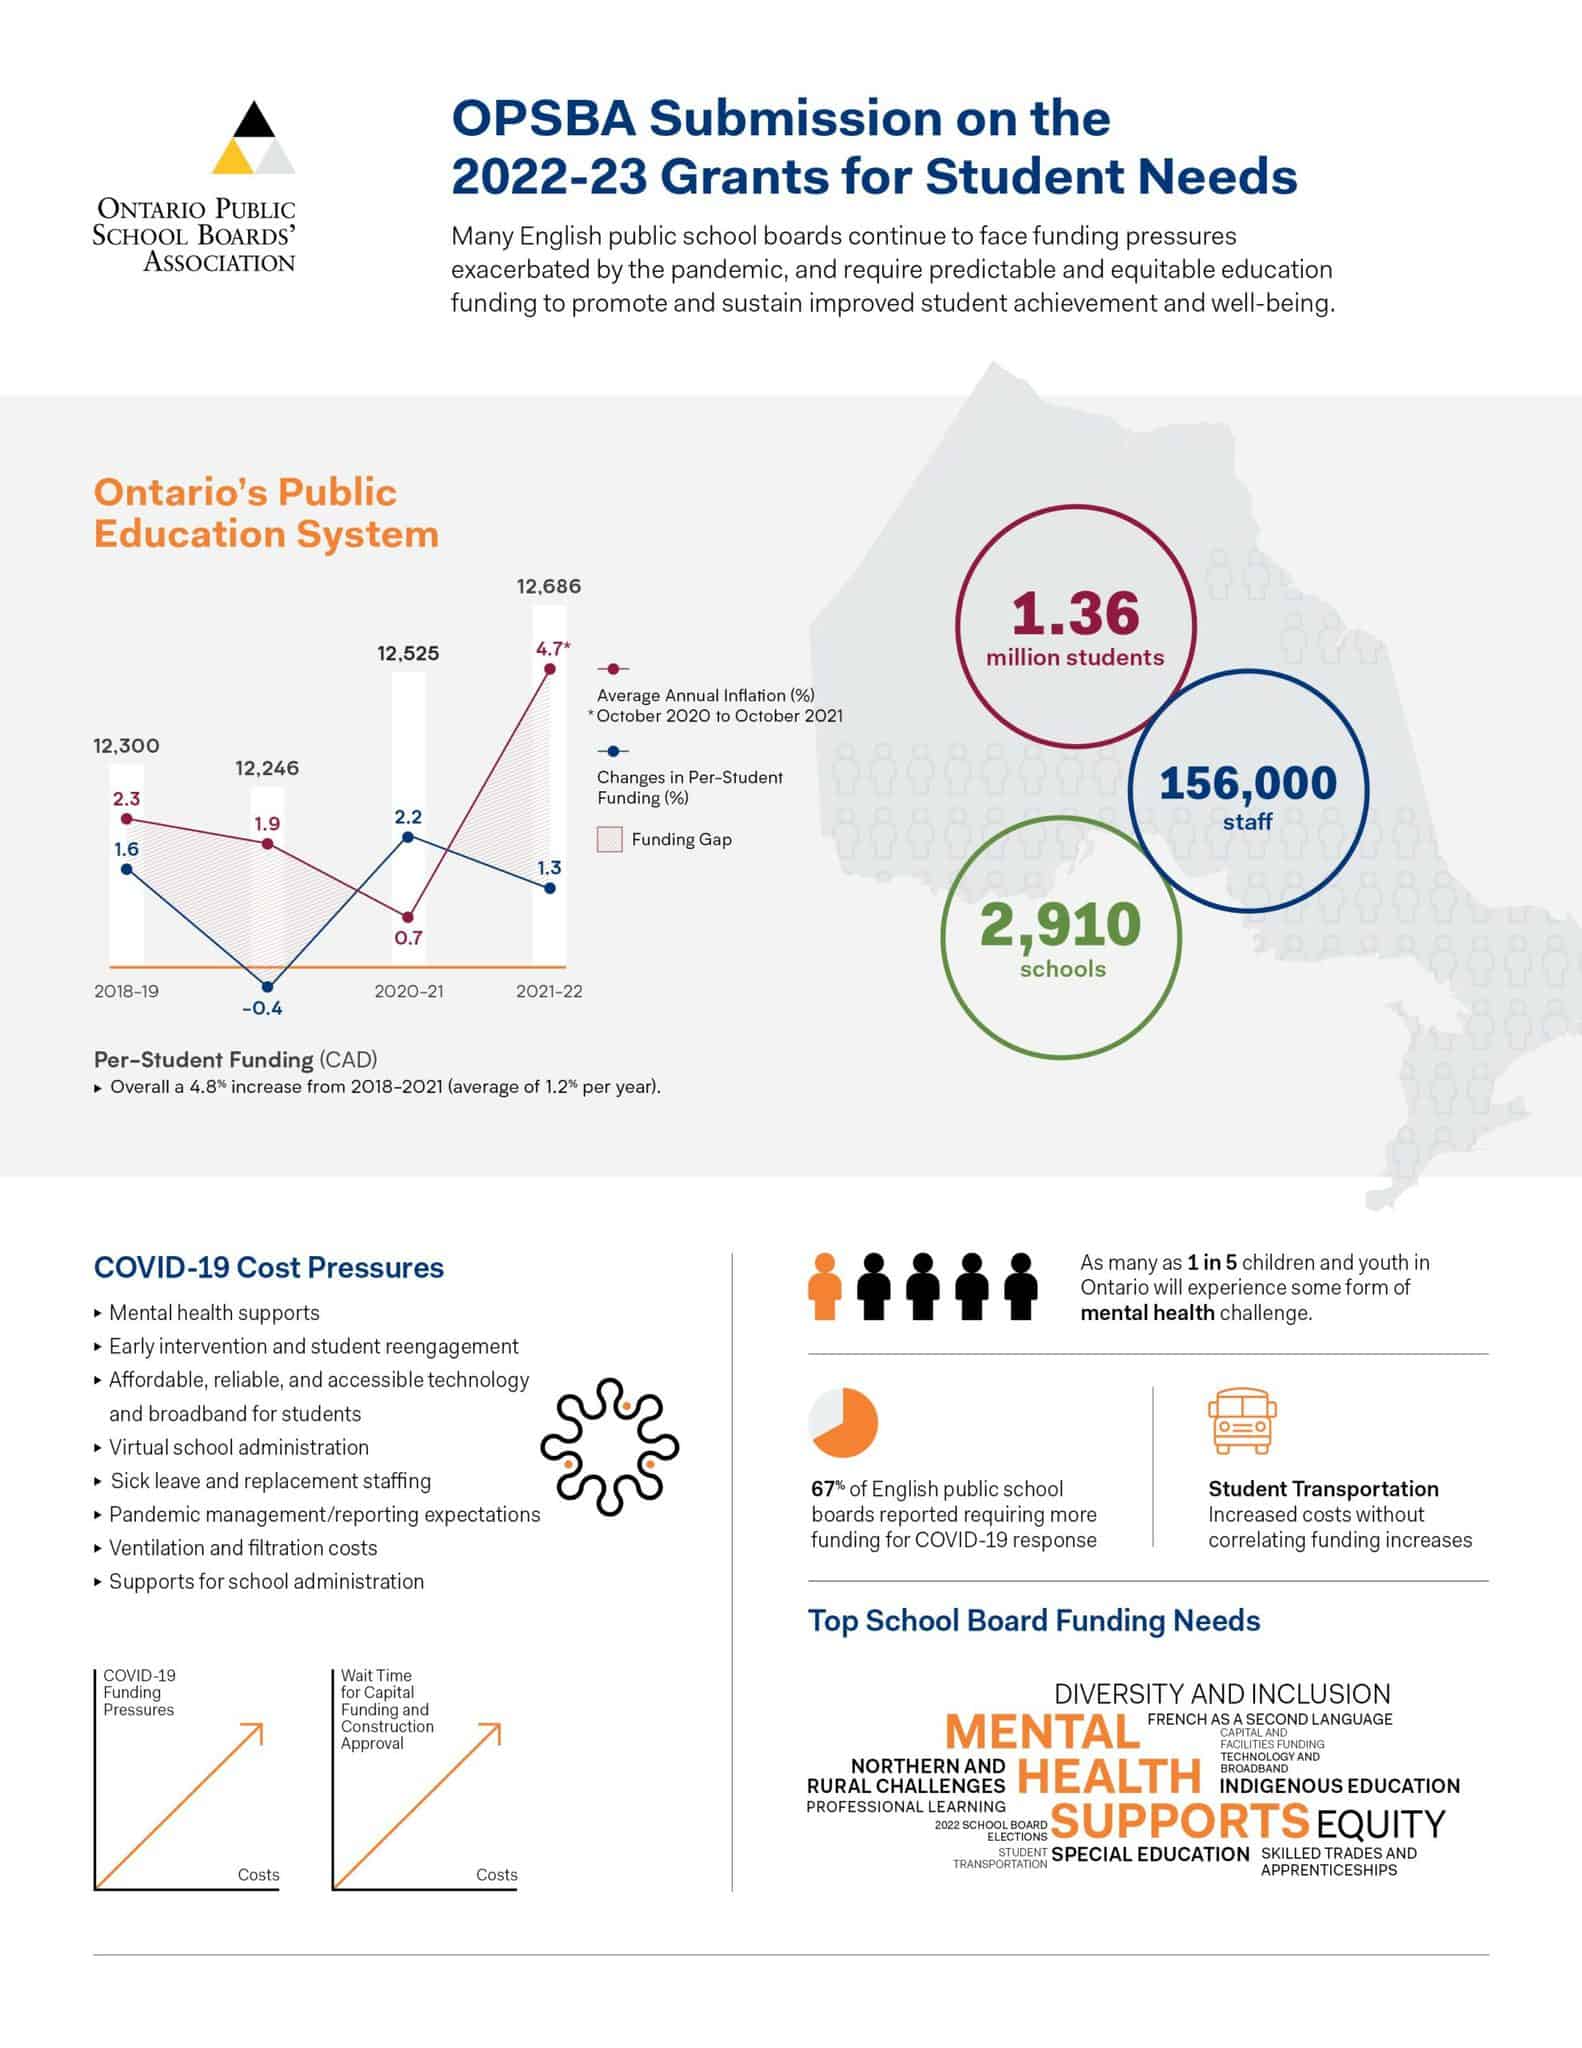 An infographic outlining OPSBA's recommendations for 2022-23 education funding.